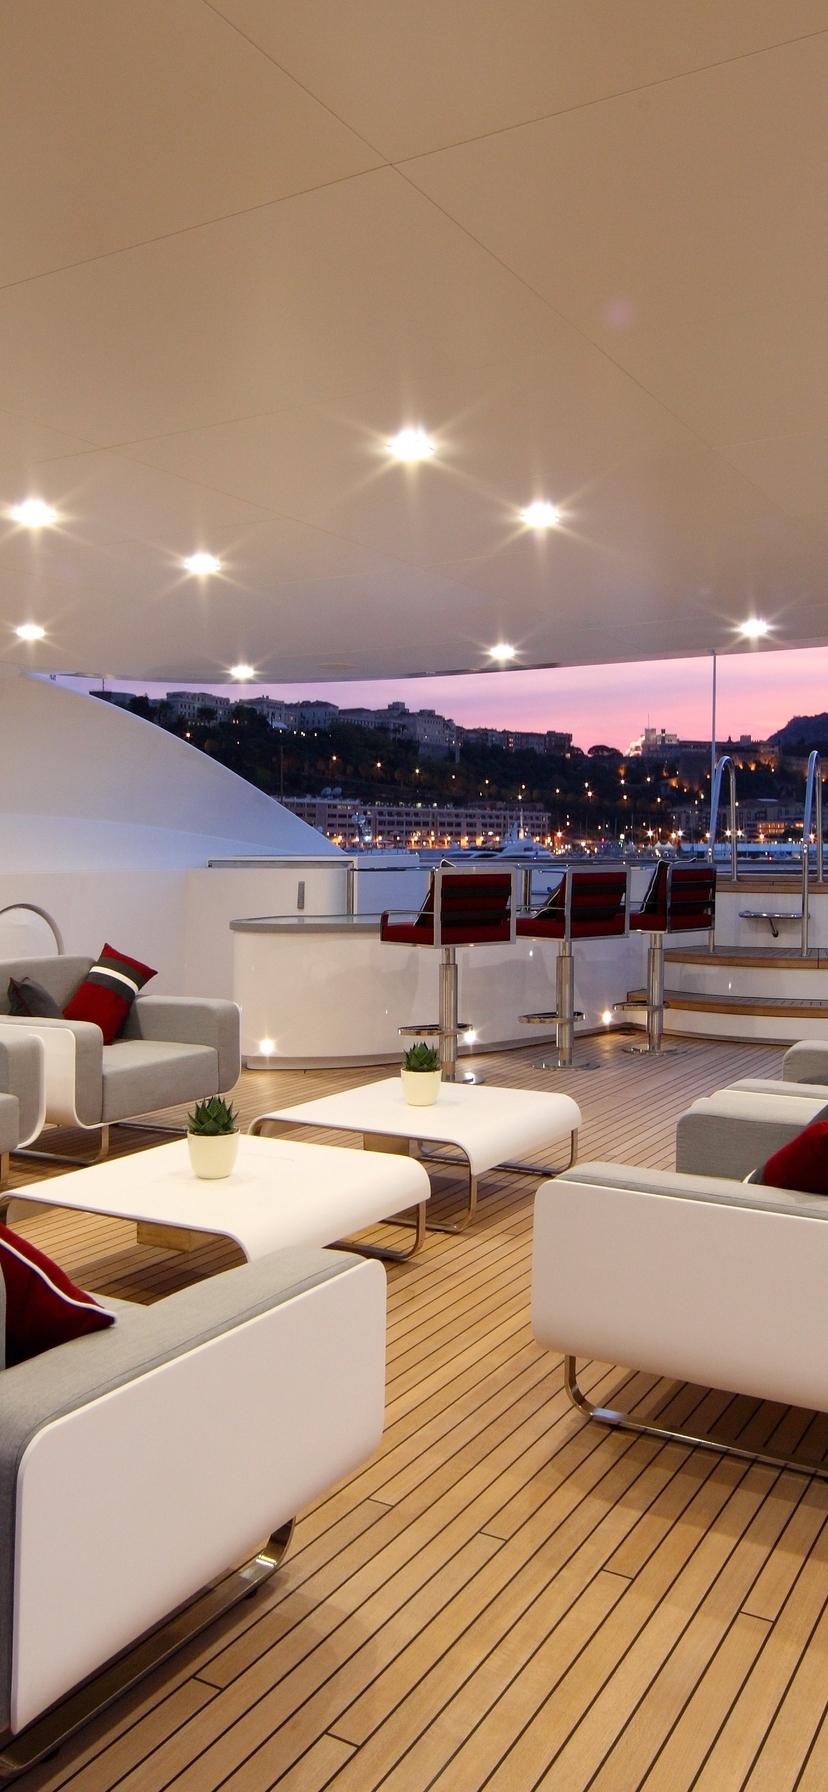 Image: A yacht, a couch, chairs, tables, bar stools, lights, night